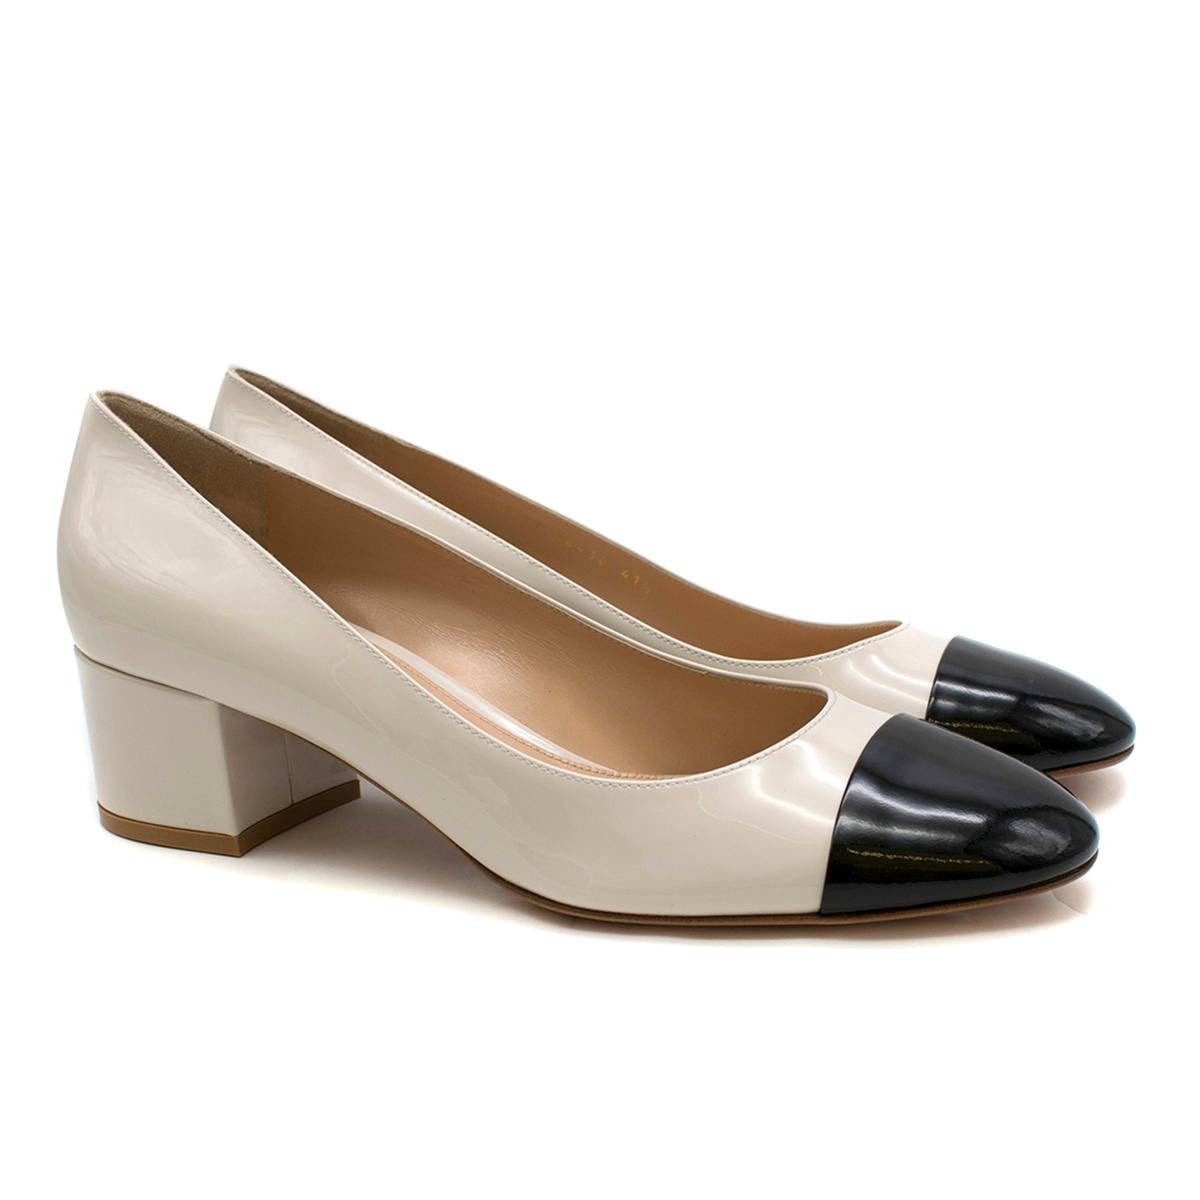 Gianvito Rossi Two-Tone Block Heel Pumps

- Vernice pumps 
- block heel 
- round toe
- slip on 
- contrasting black toe
- leather insole and sole

This item comes with the original box.

Please note, these items are pre-owned and may show some signs